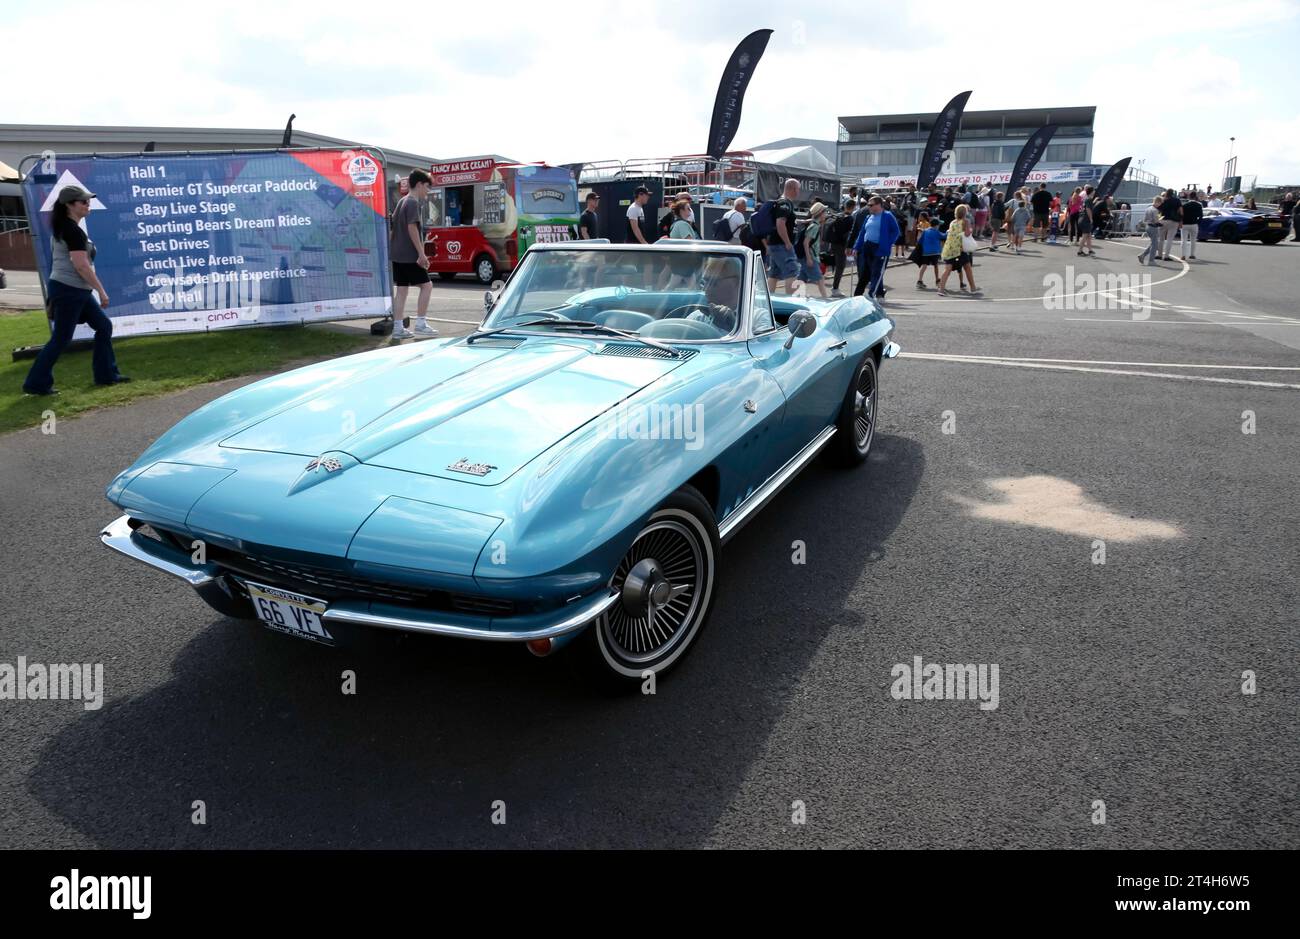 A Blue, 1966, Chevrolet Corvette C2 about to enter the Cinch Live Arena, as part of the Owners Club Display, at the 2023 British Motor Show Stock Photo